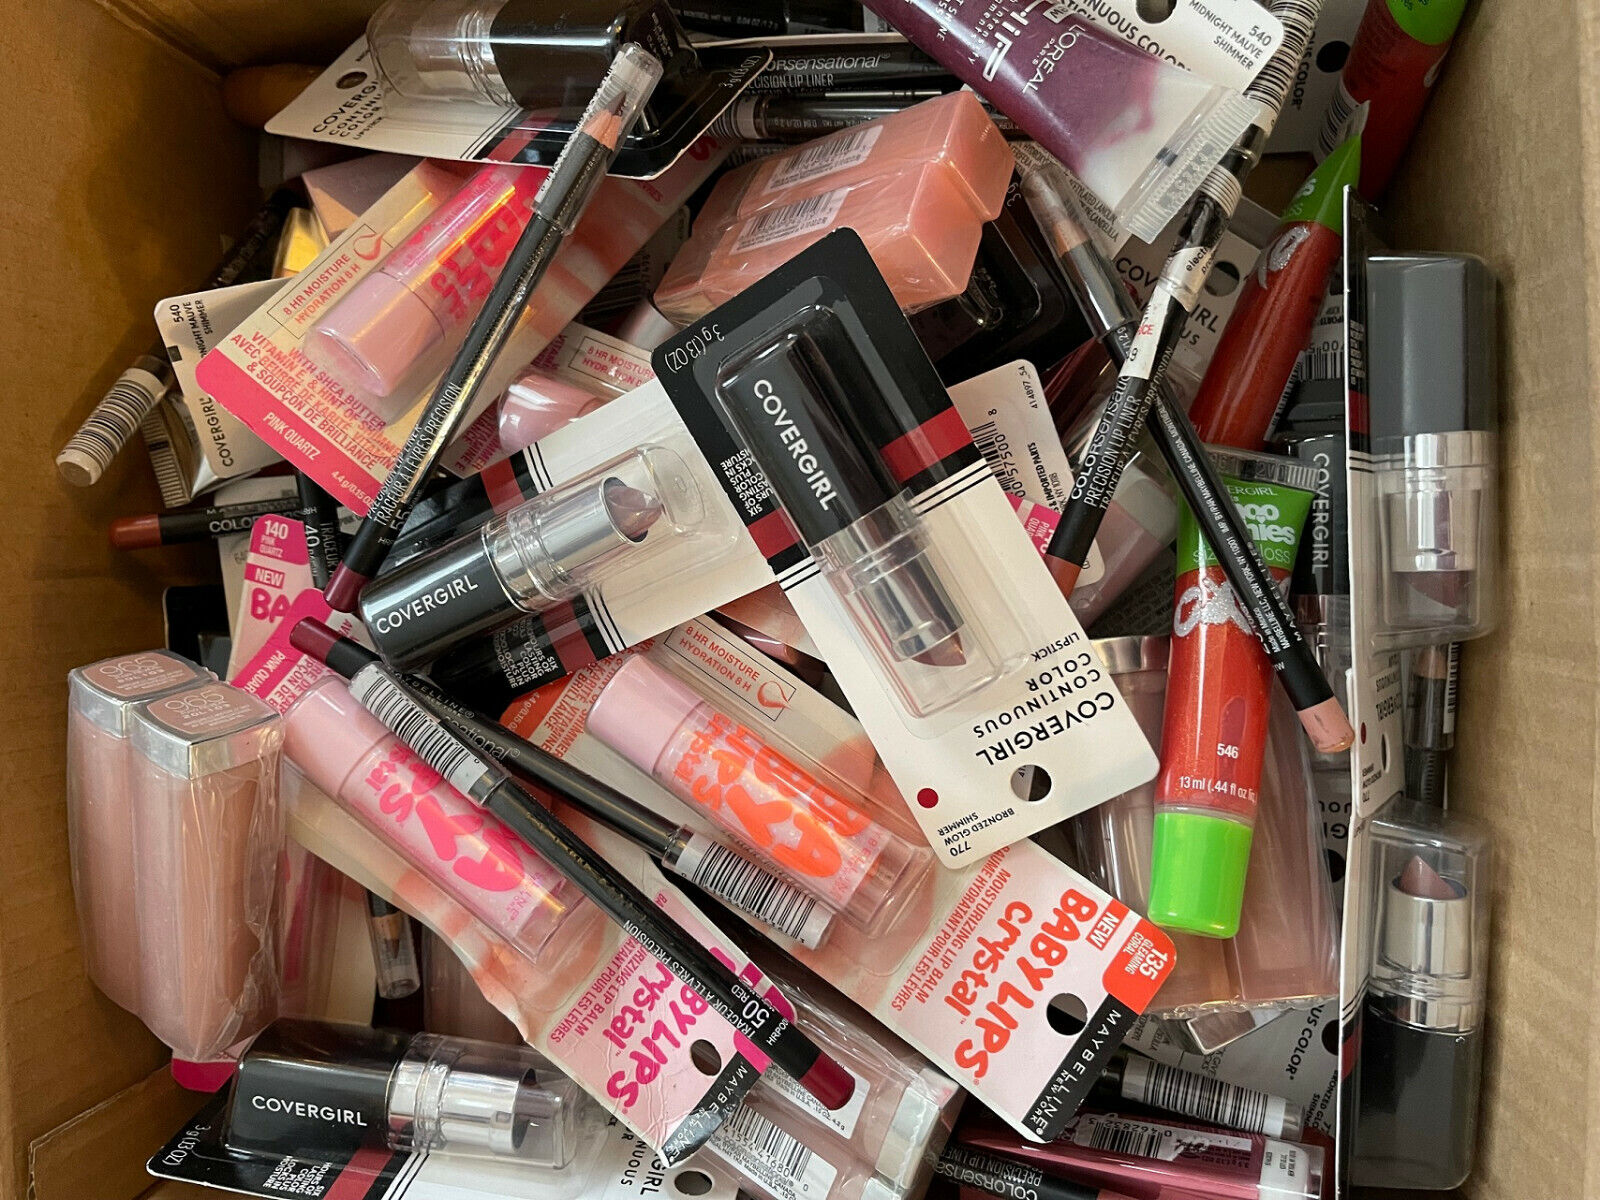 200 x ASSORTED Makeup COSMETICS MIXED BRANDS LOreal CoverGirl Wholesale Lot 200